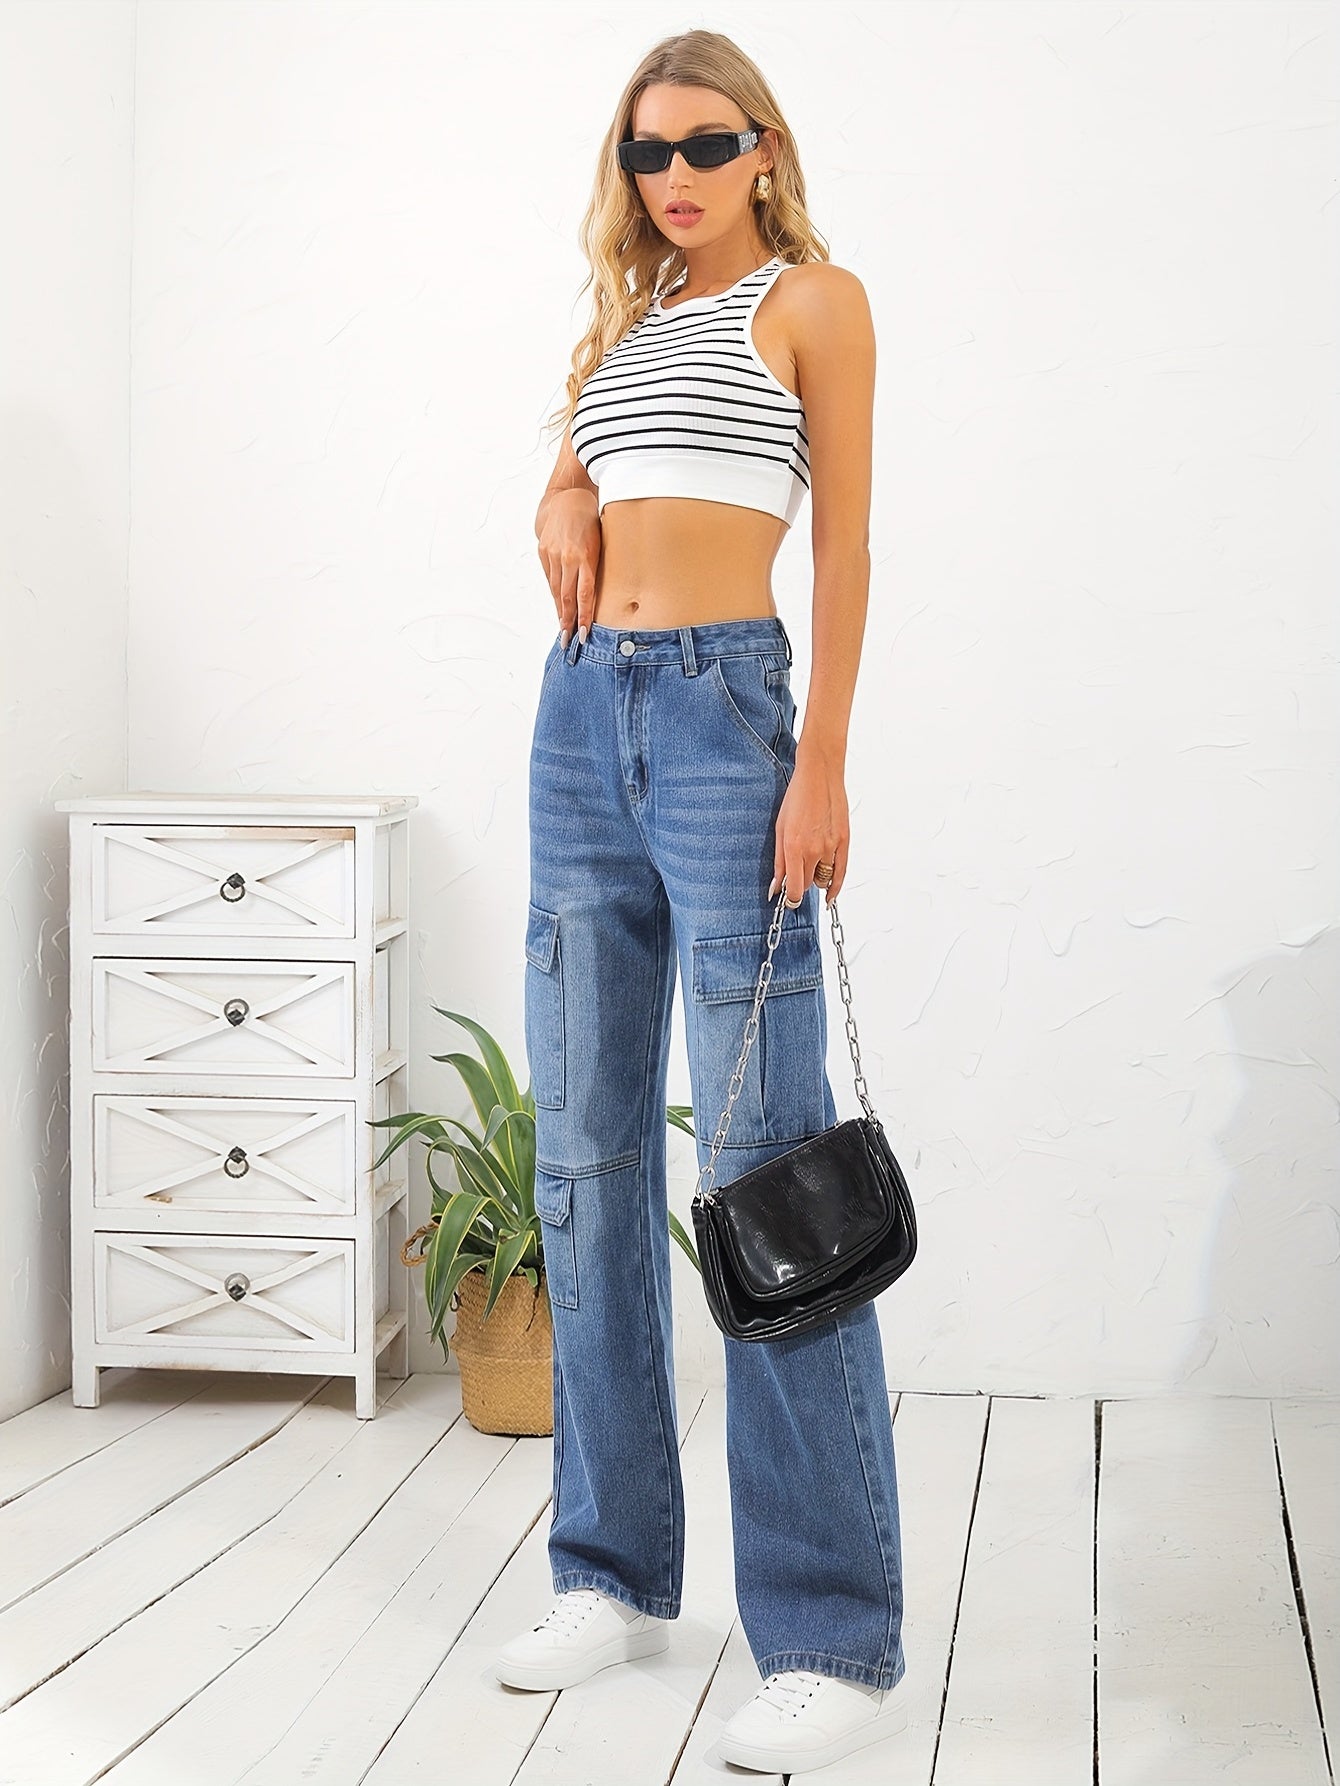 「lovevop」Flap Cargo Pocket Whiskering Denim Pants, Water Ripple Embossed Crotch Loose Straight Leg Jeans, Causal Pants For Every Day, Women's Denim Jeans & Clothing